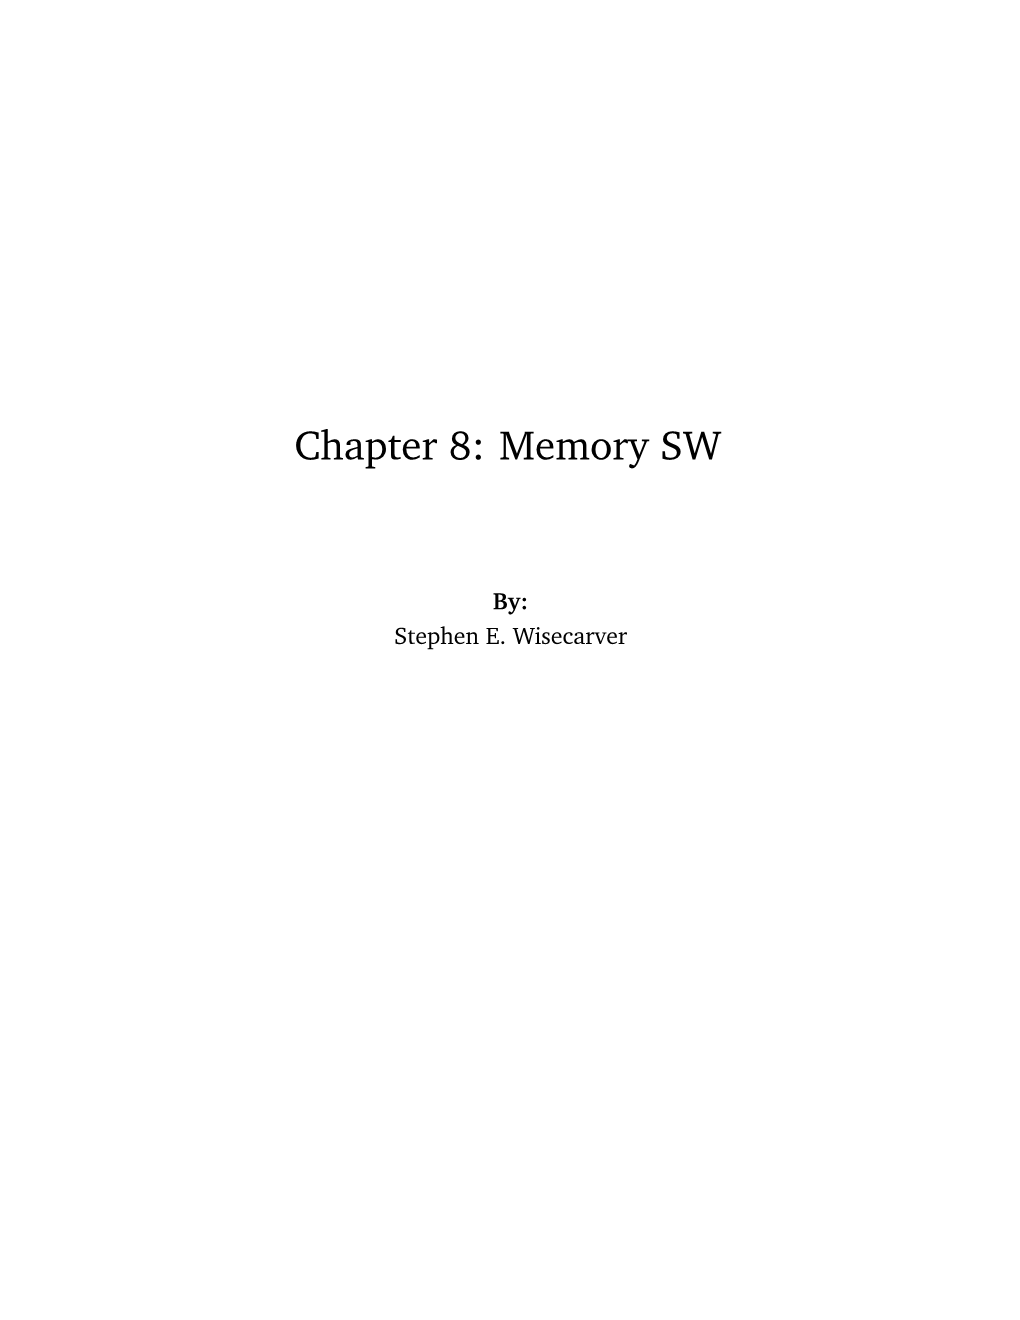 Chapter 8: Memory SW